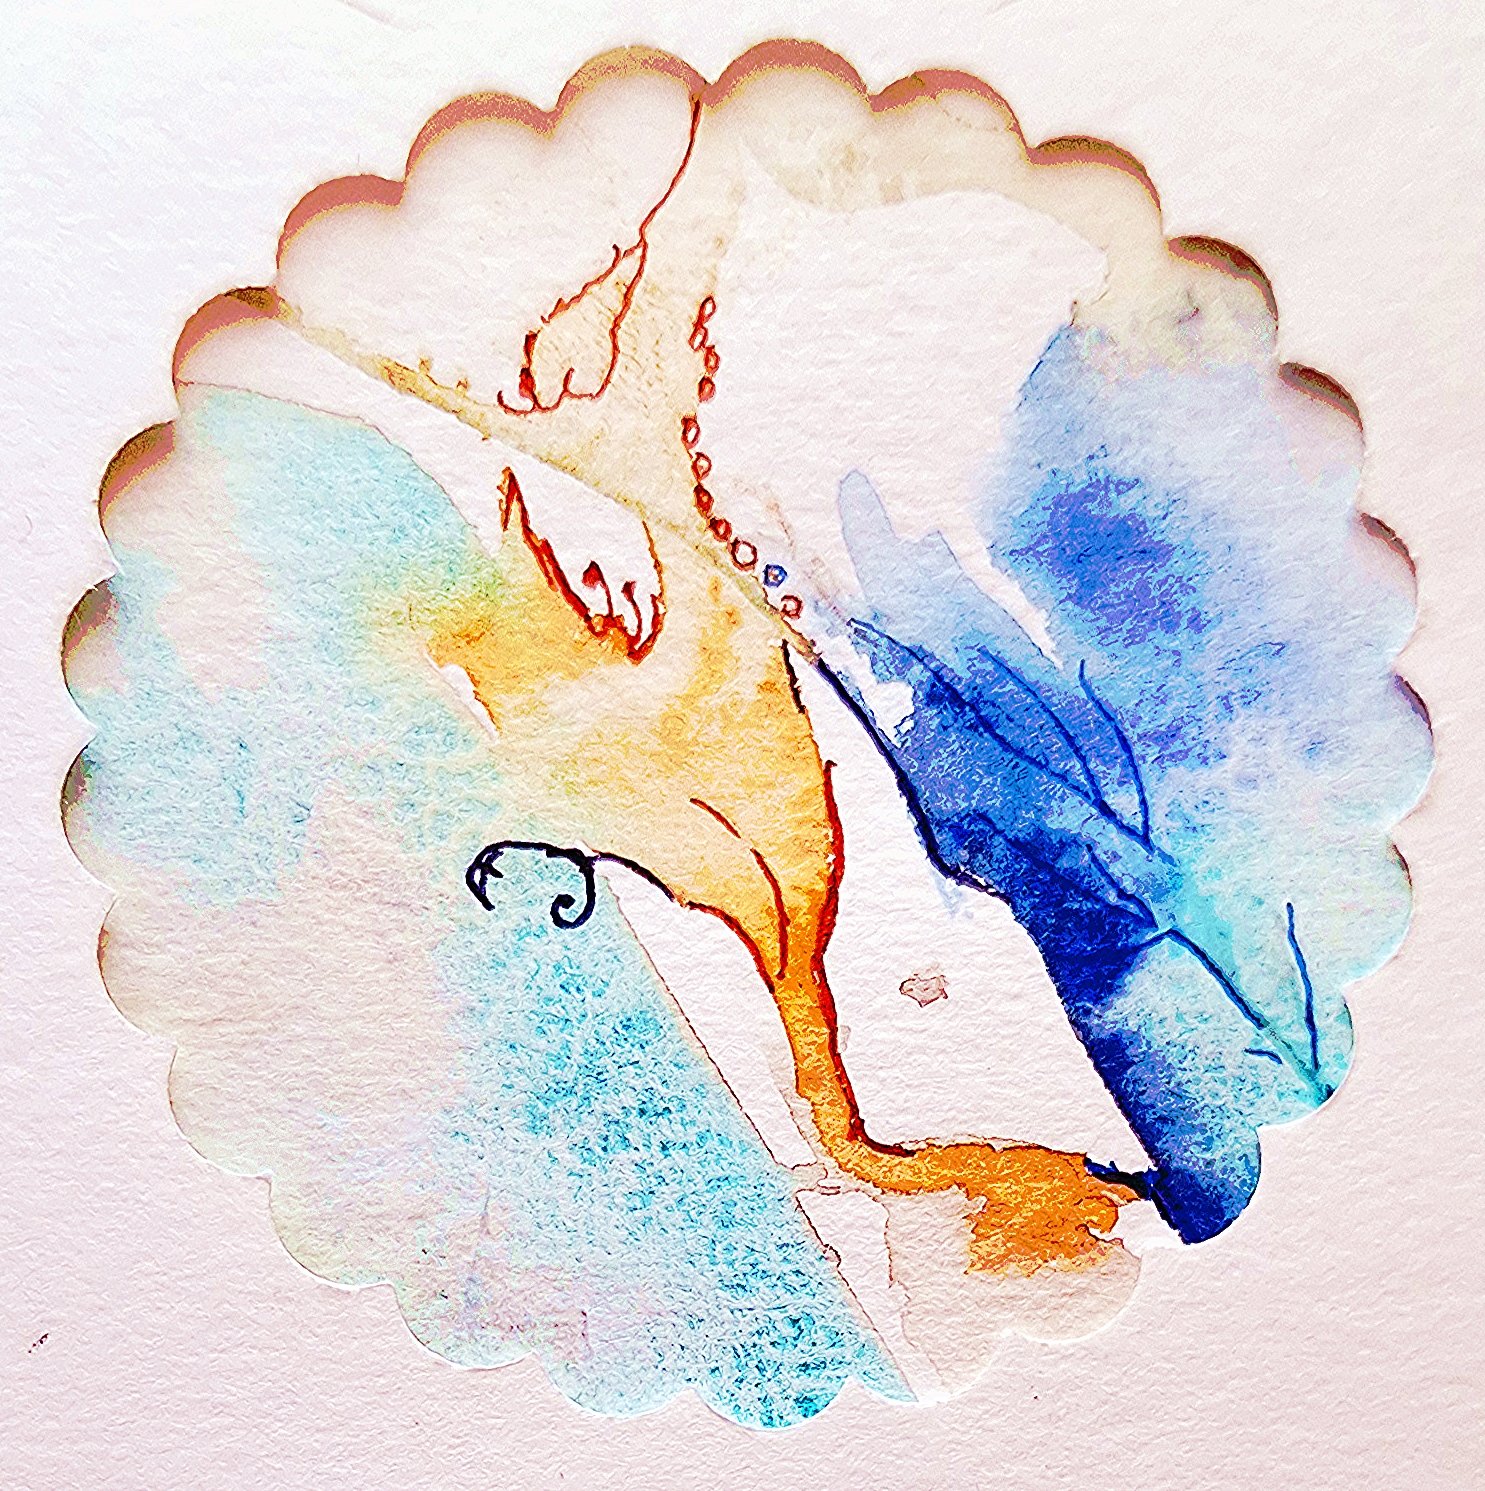 A workshop of Mindful Intuitive Colour & Form in Watercolours